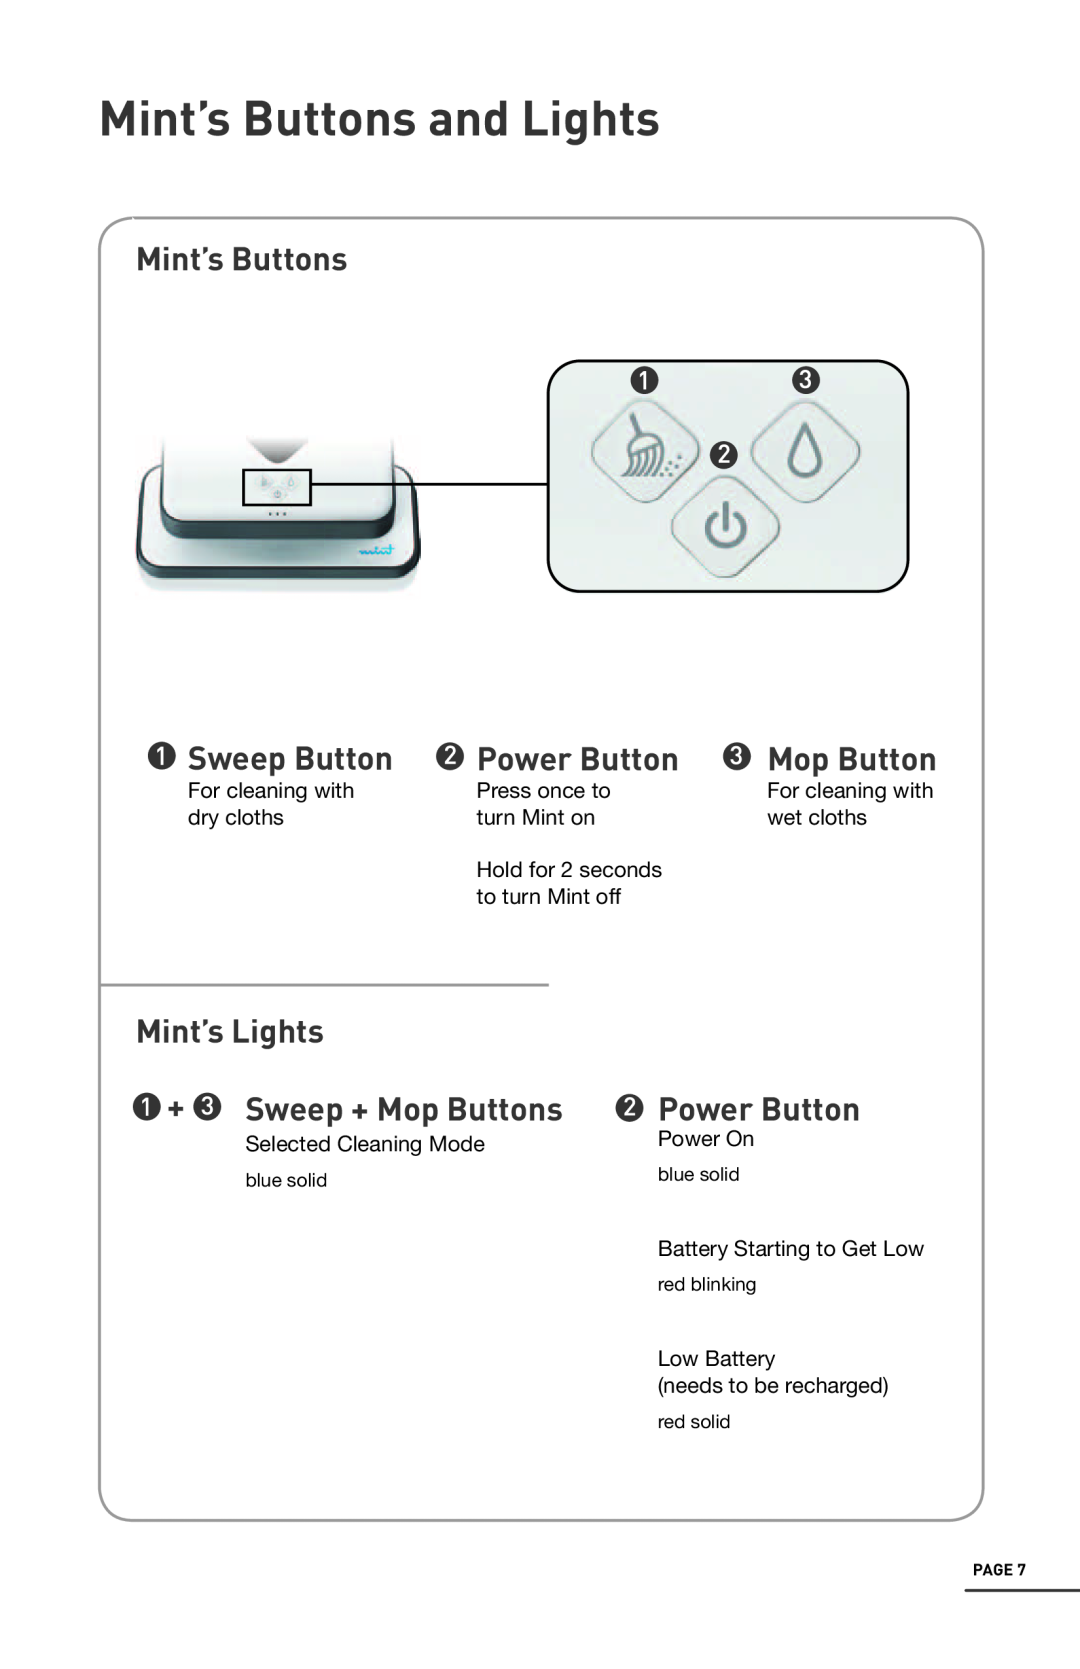 iRobot 4200 Mint’s Buttons and Lights, Sweep Button, Power Button, Mint’s Lights, Sweep + Mop Buttons, Power On, Page 